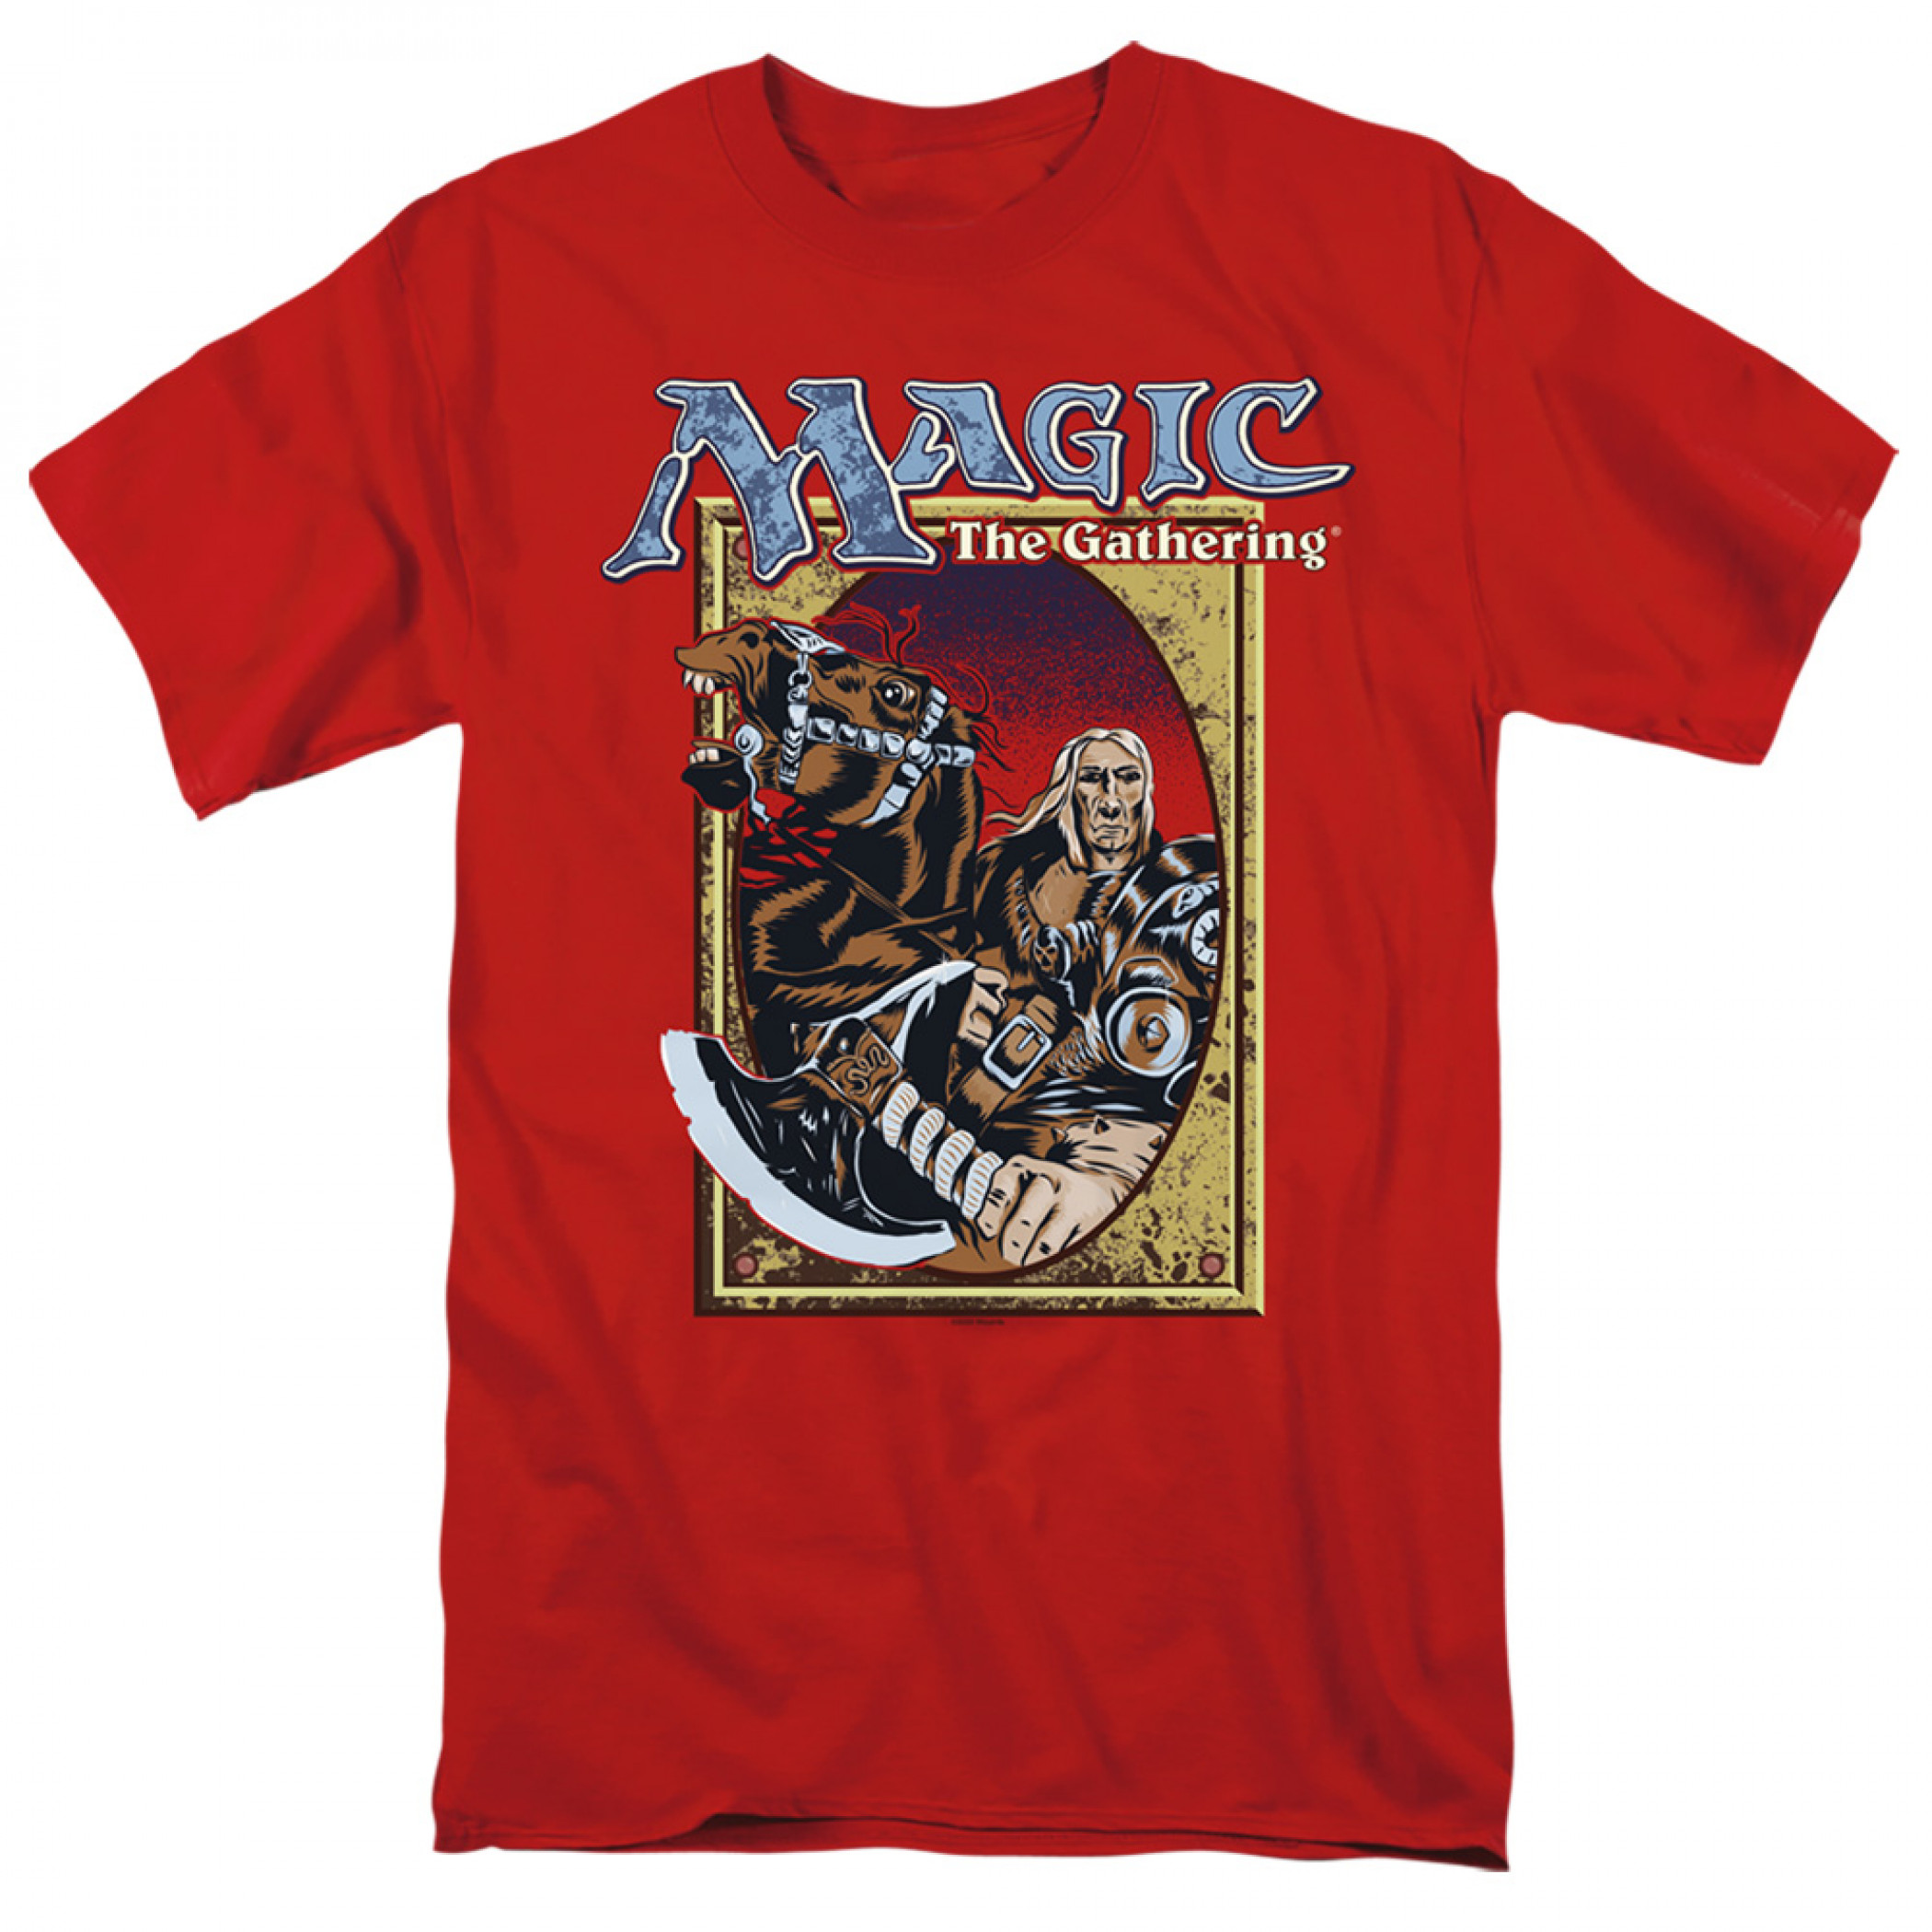 Magic the Gathering Fifth Edition T-Shirt